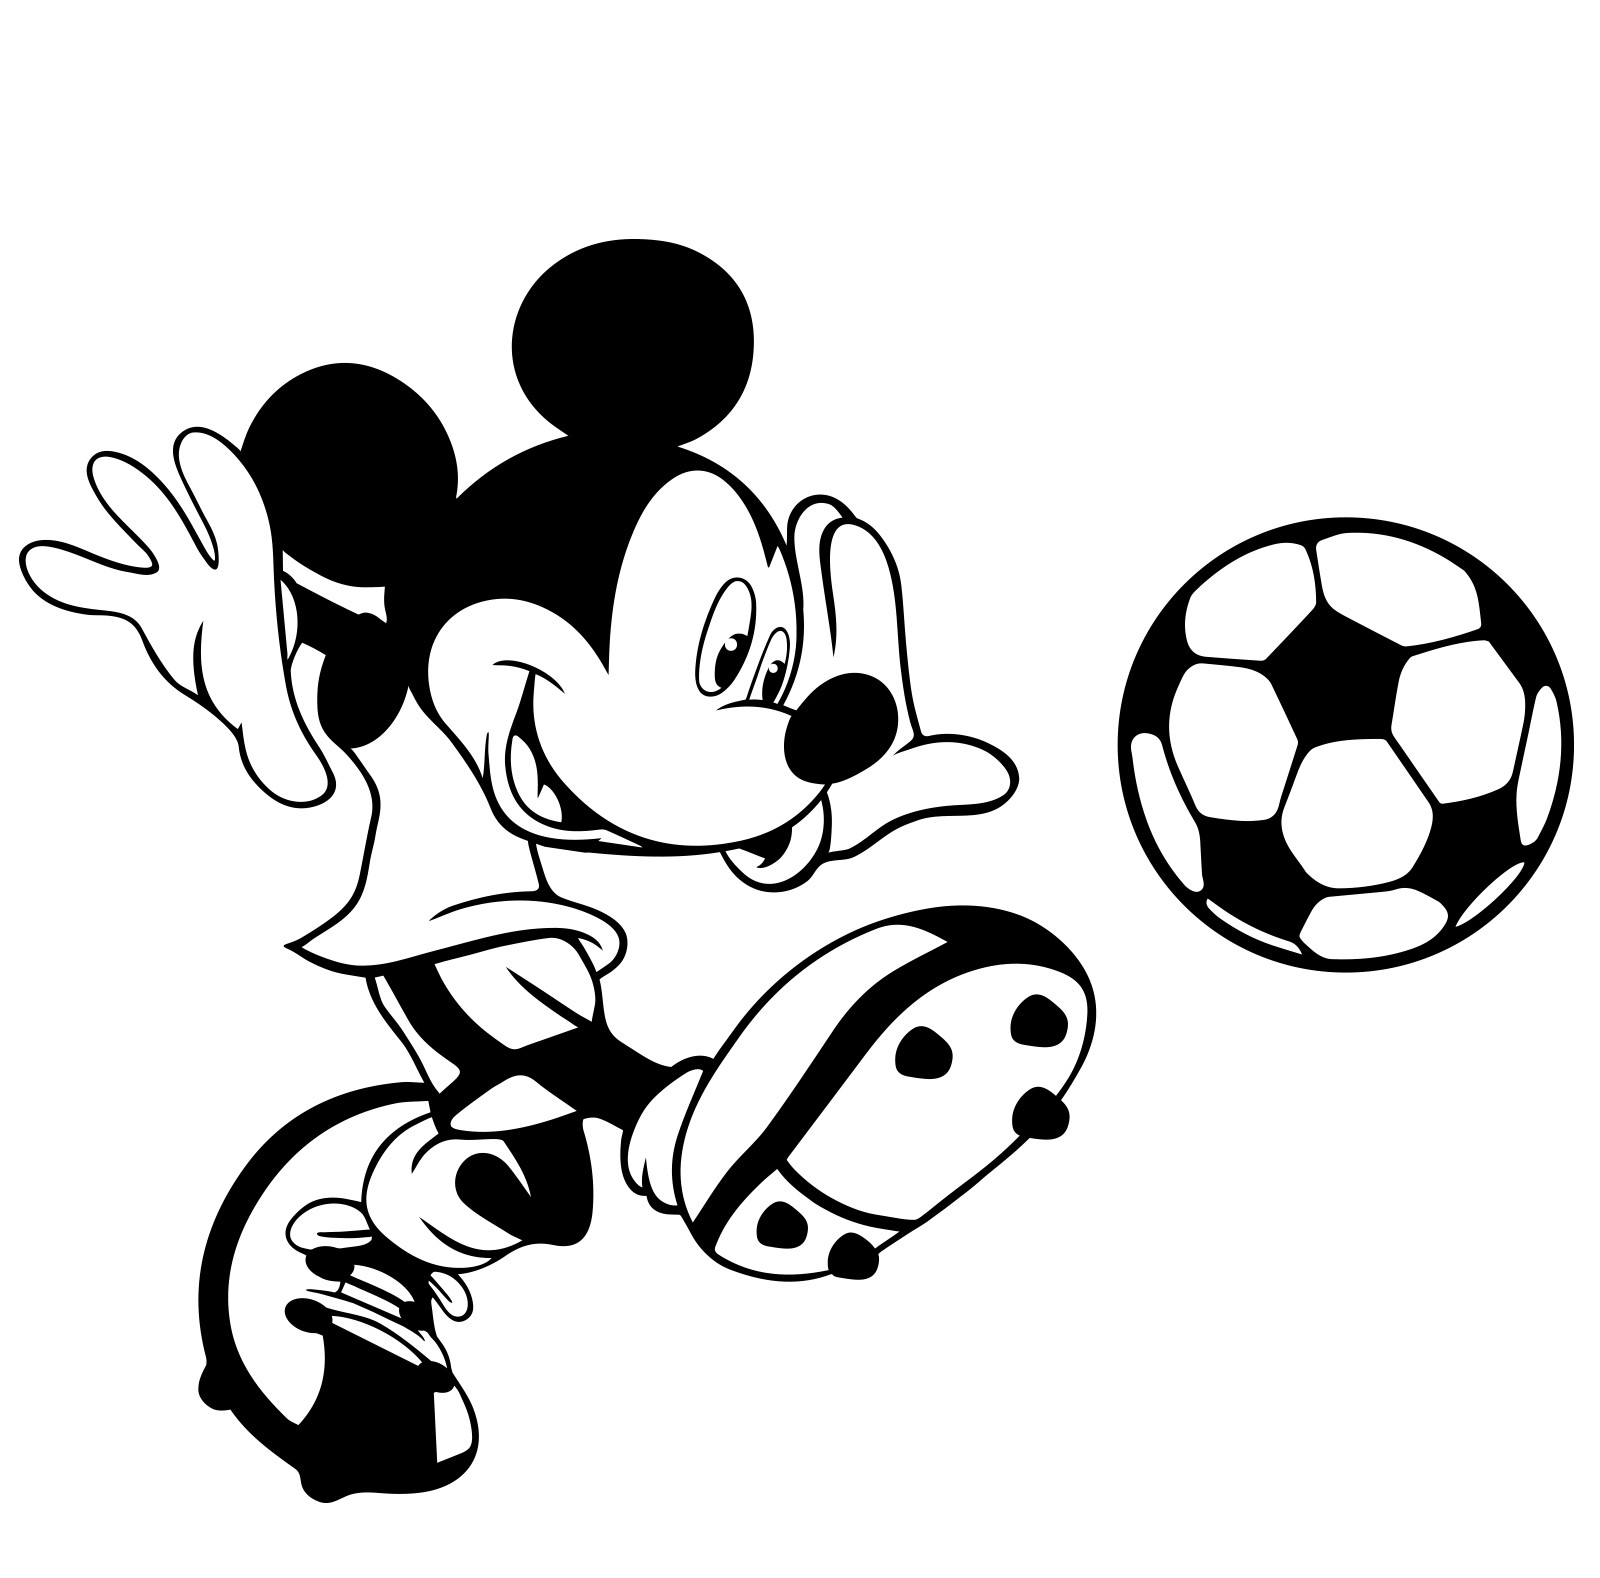 mickey mouse clip art free black and white - photo #37